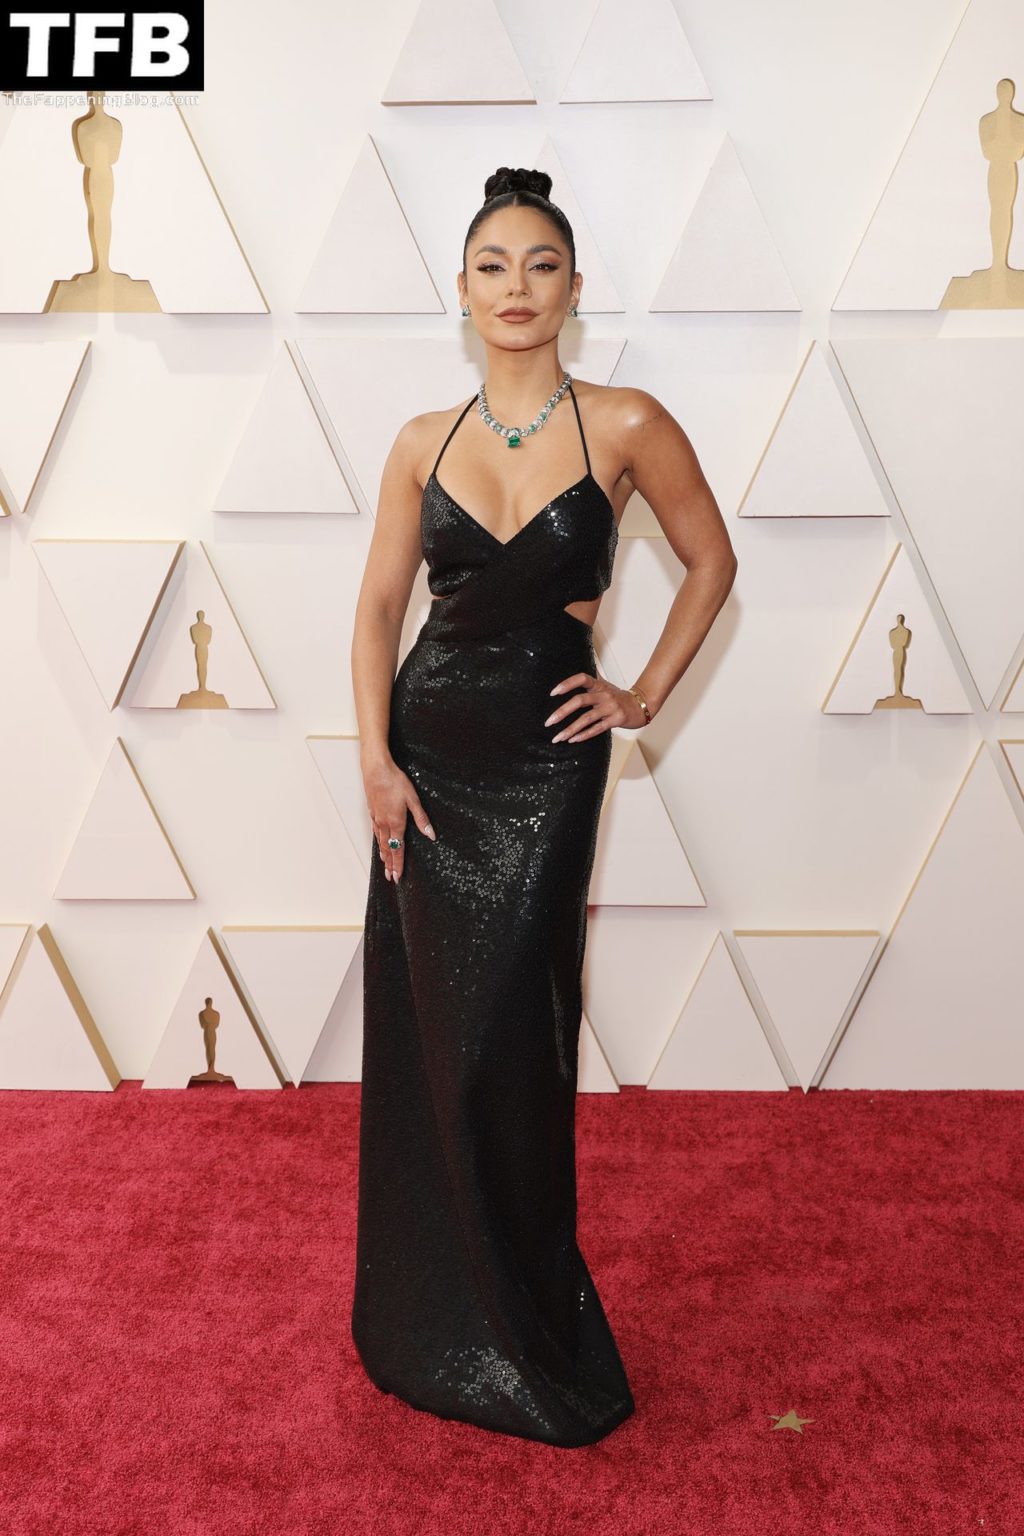 Vanessa Hudgens Sexy The Fappening Blog 26 4 1024x1536 - Vanessa Hudgens Poses on the Red Carpet at the 94th Annual Academy Awards (83 Photos)